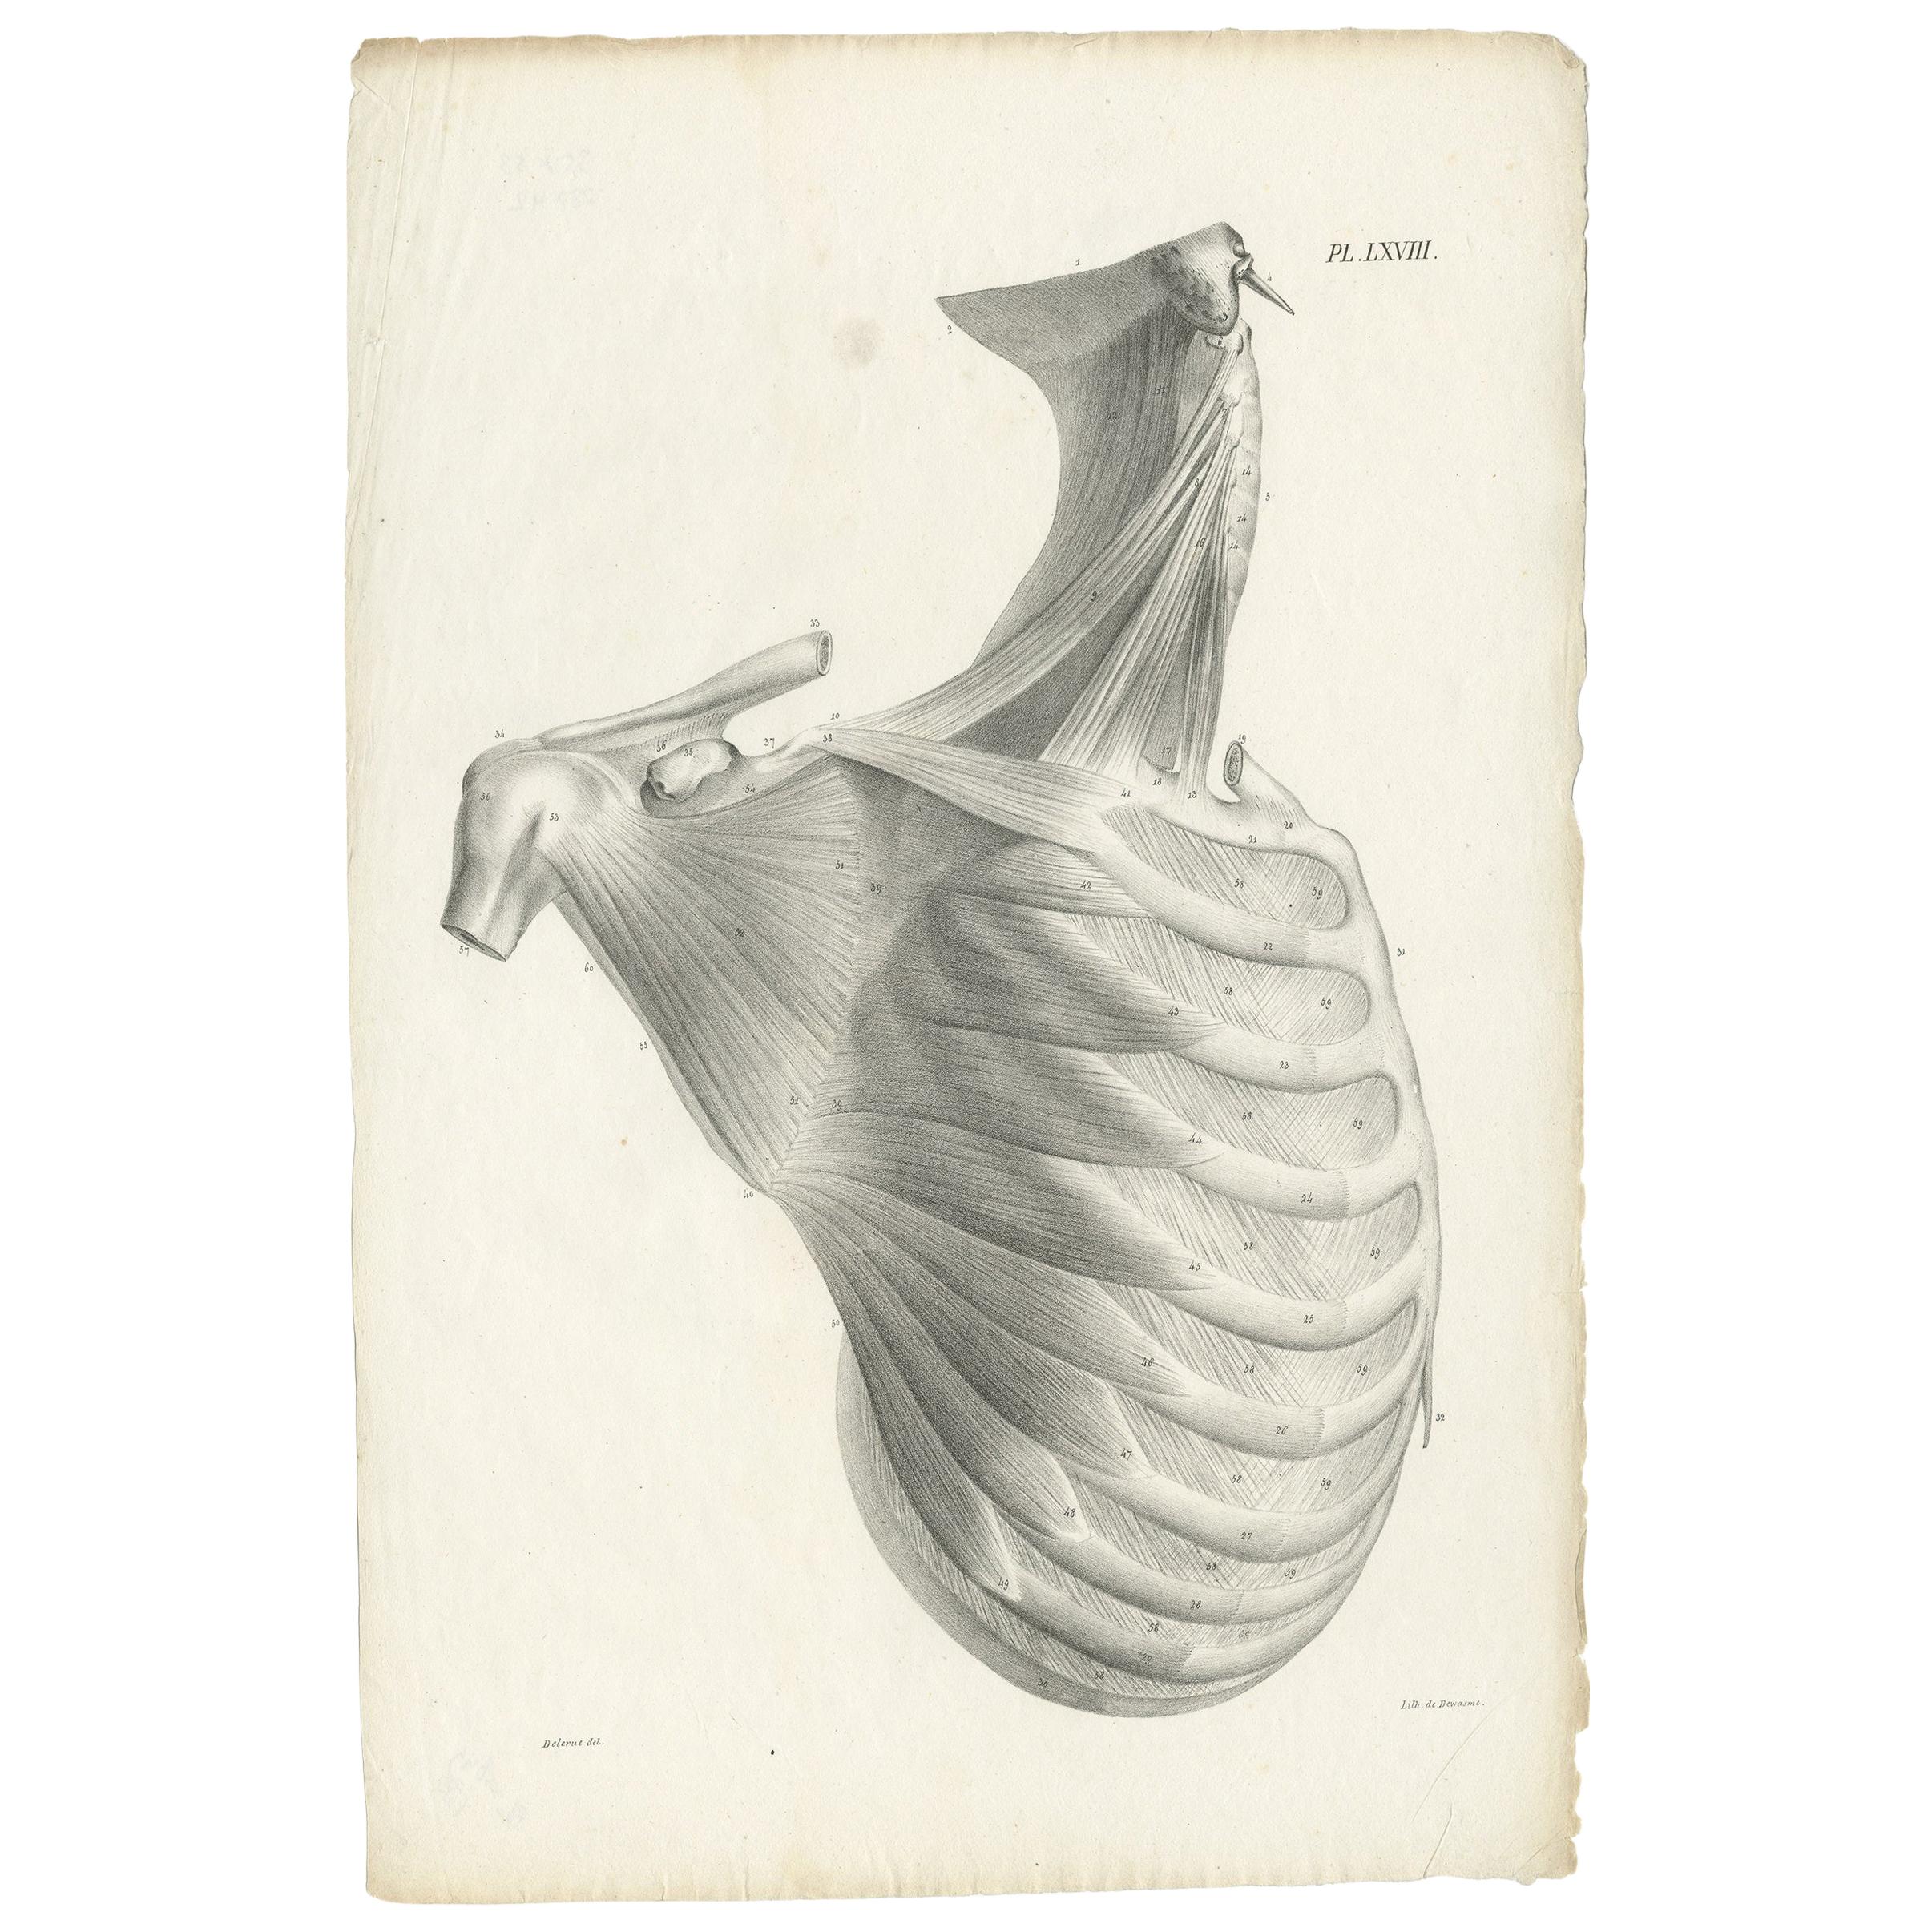 Pl. LXVIII Antique Anatomy / Medical Print of the Rib Cage by Cloquet, '1821'